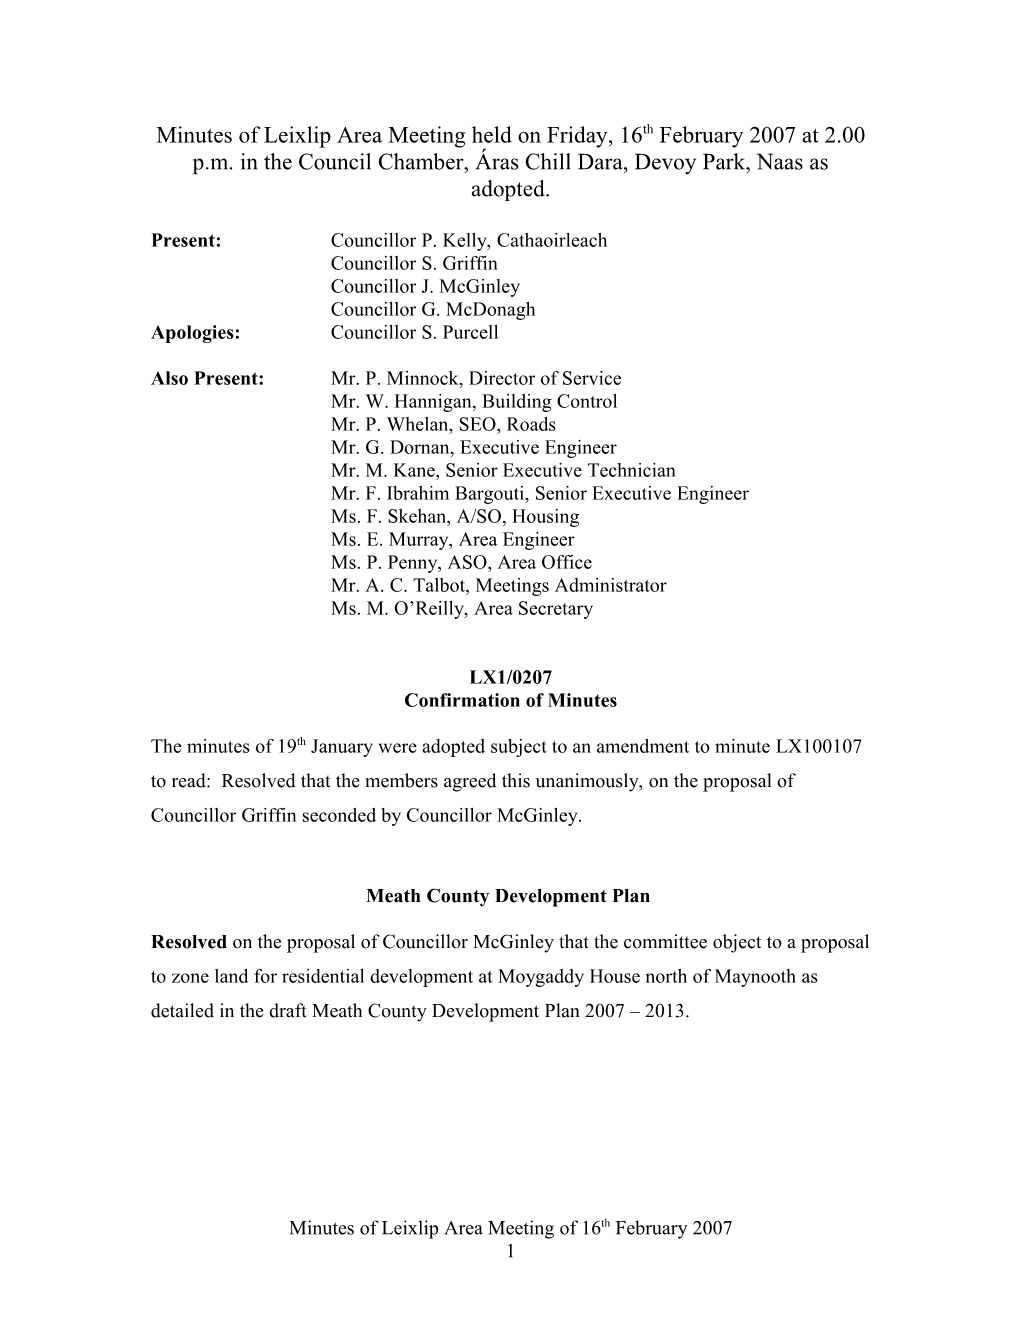 Draft Minutes of Leixlip Area Meeting Held on Friday, 17Th November 2006 at 2